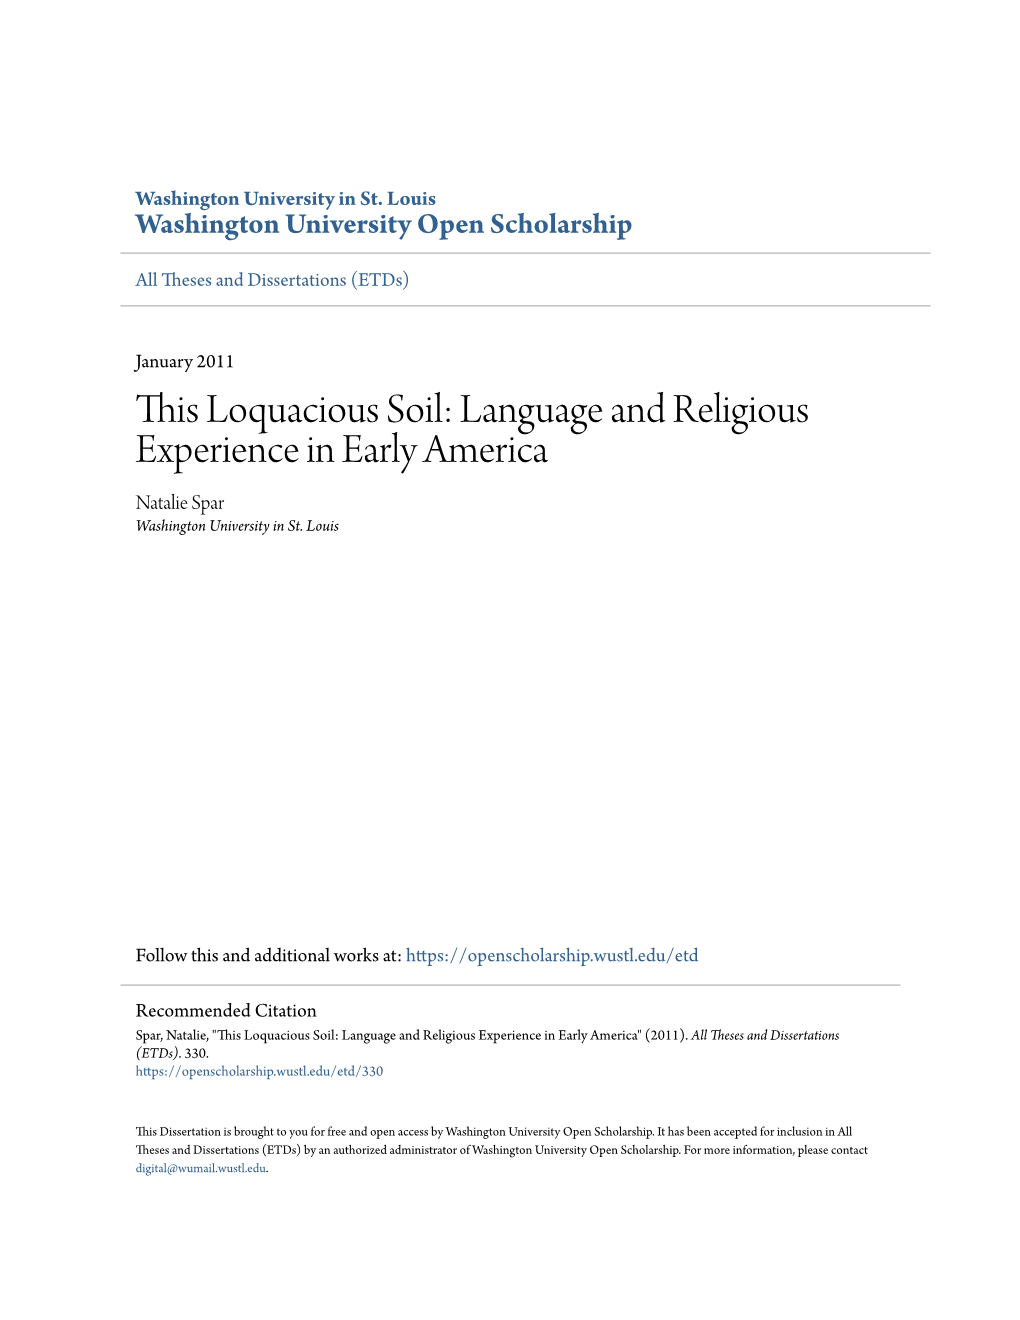 This Loquacious Soil: Language and Religious Experience in Early America Natalie Spar Washington University in St